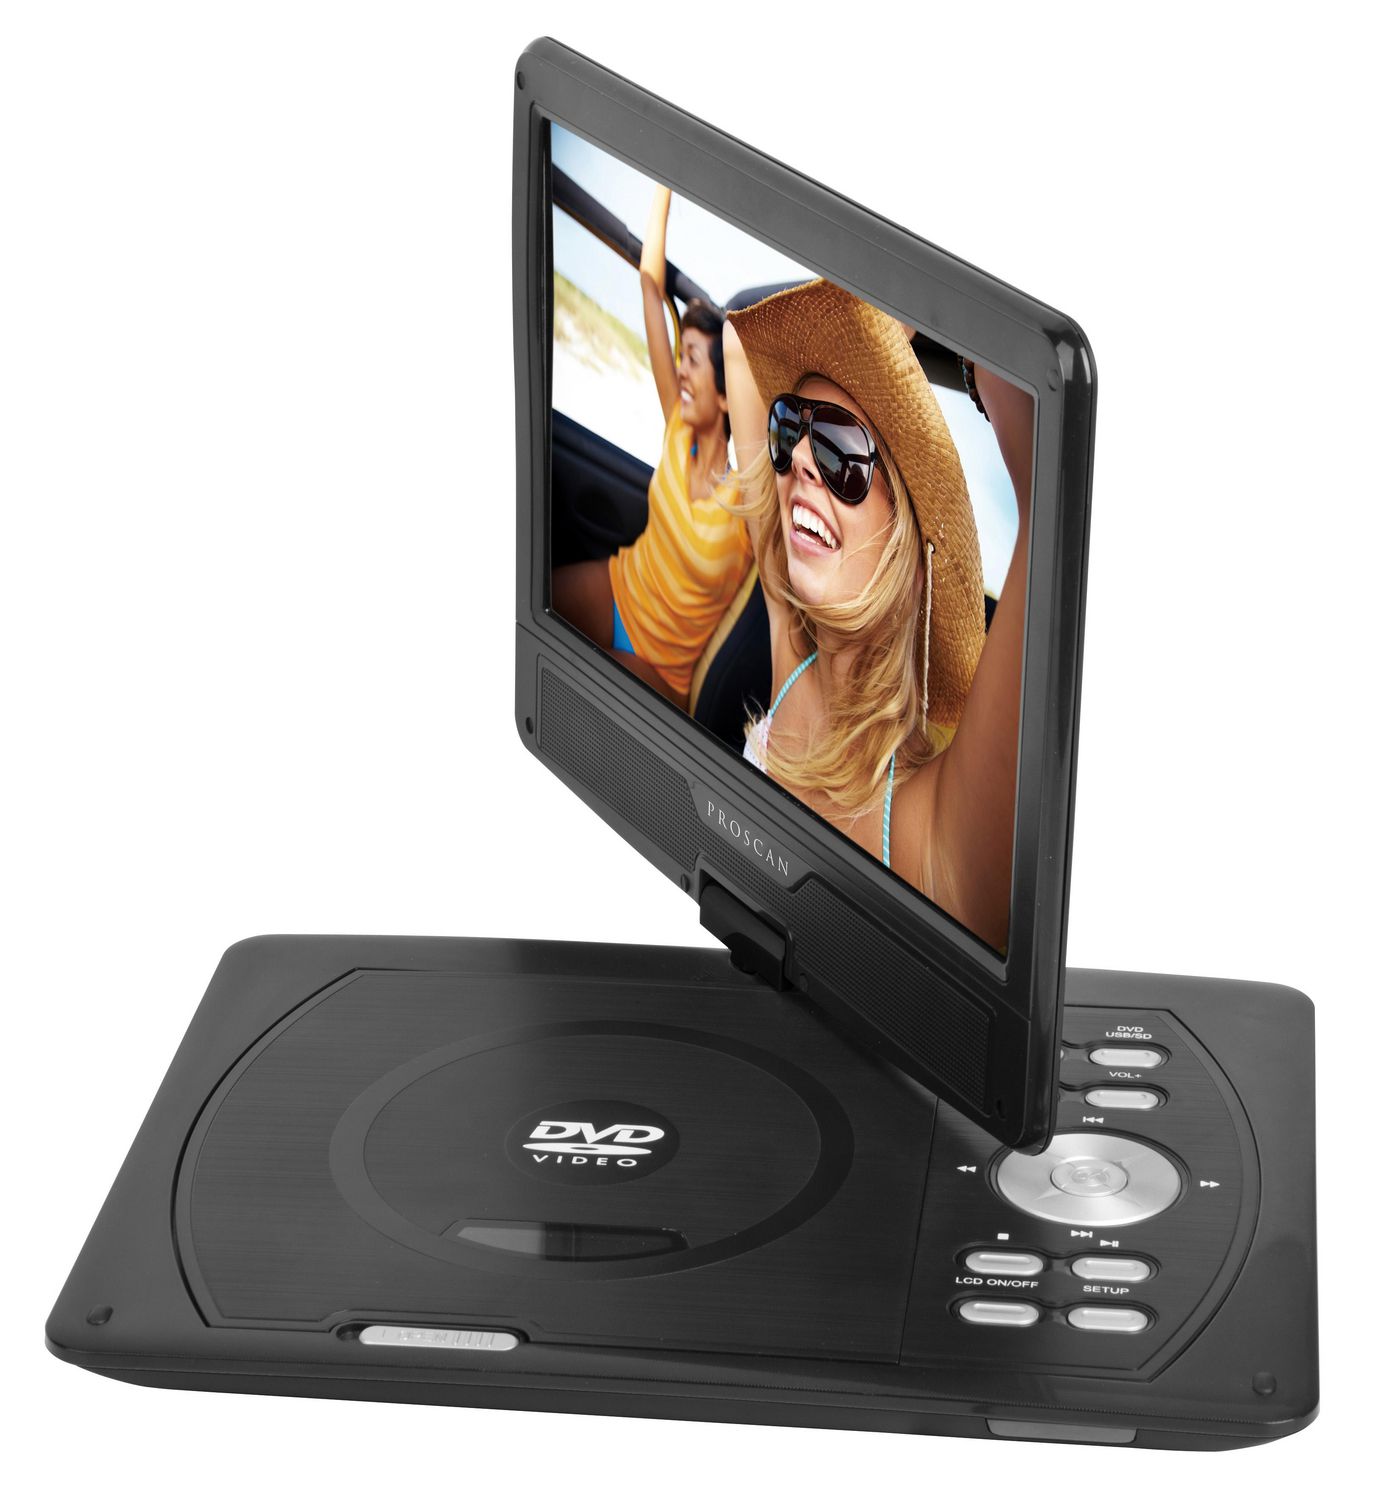 Proscan 10-in Portable DVD Player Black, Screen swivels up to 180° 